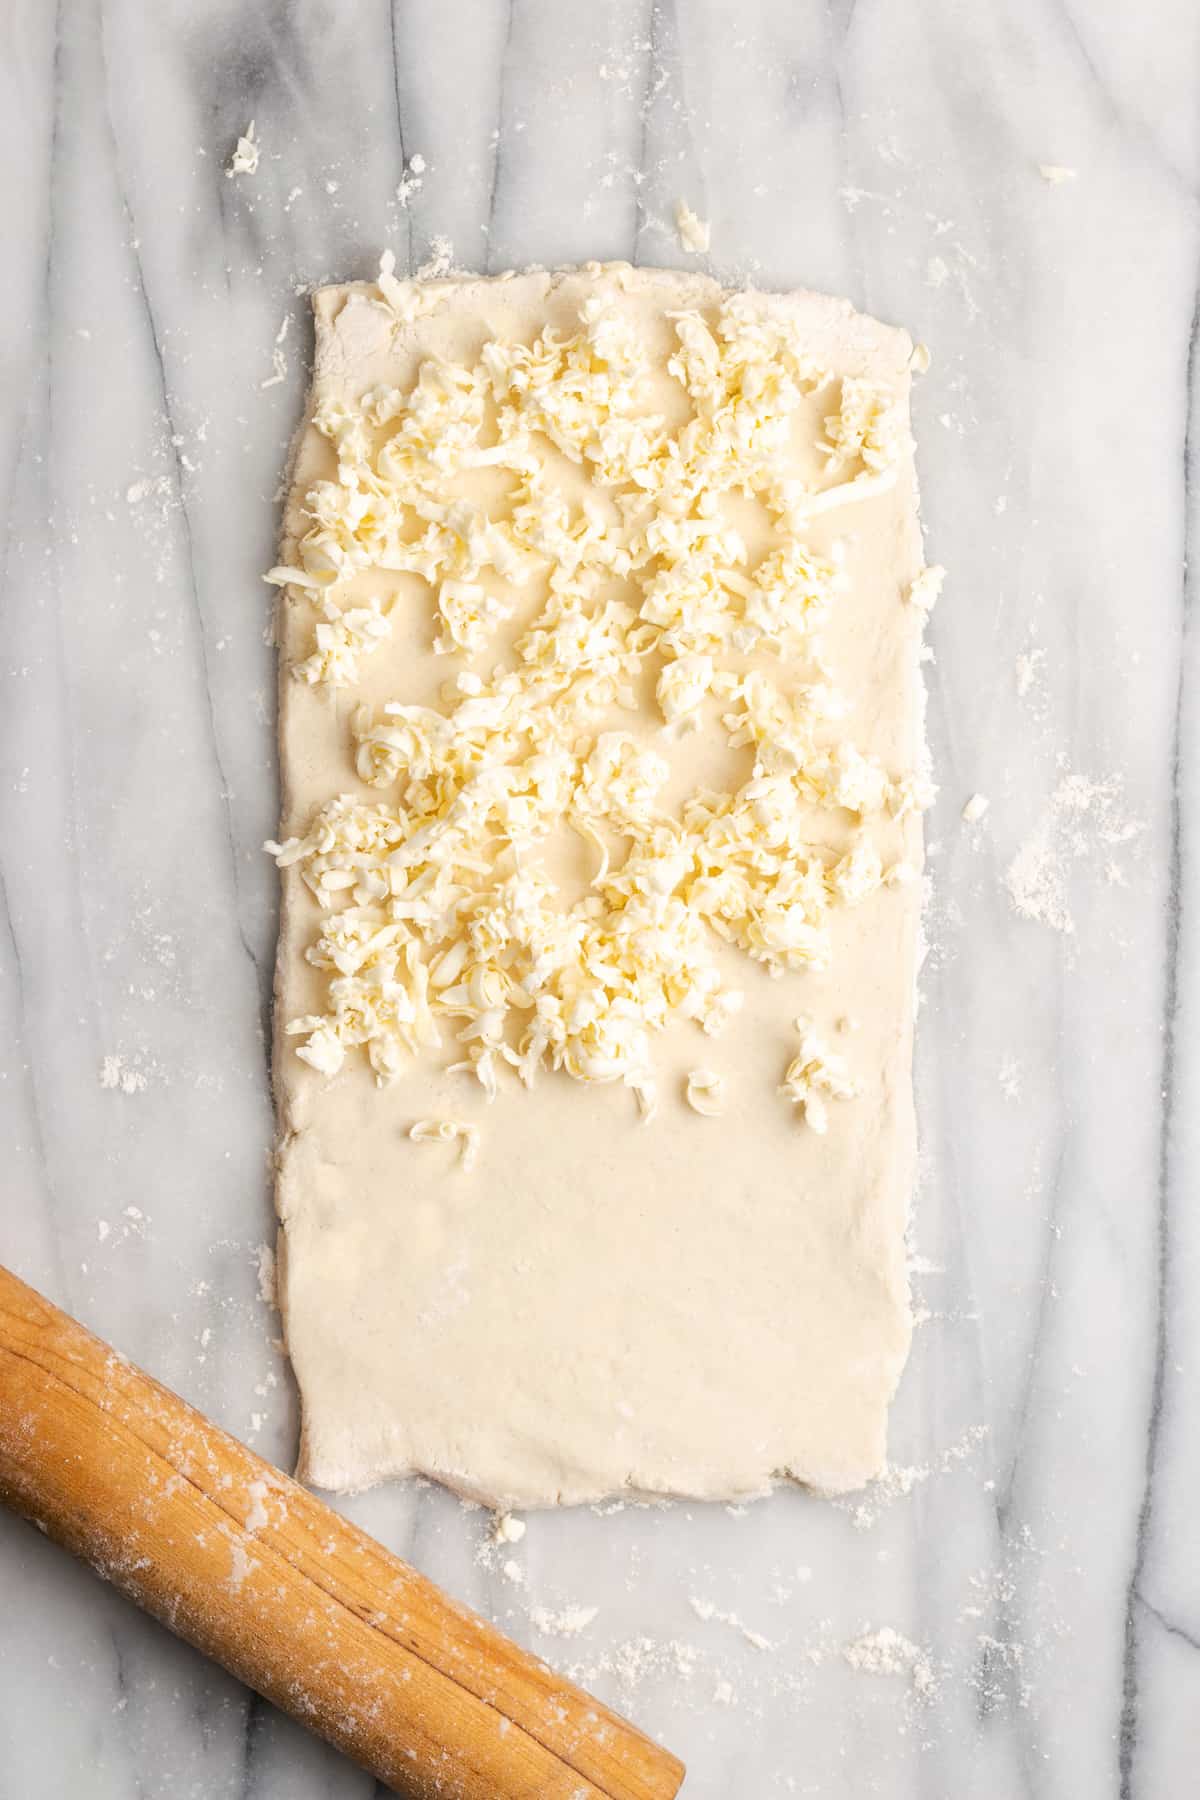 A slightly thick rectangle of dough with shredded butter covering two-thirds of it